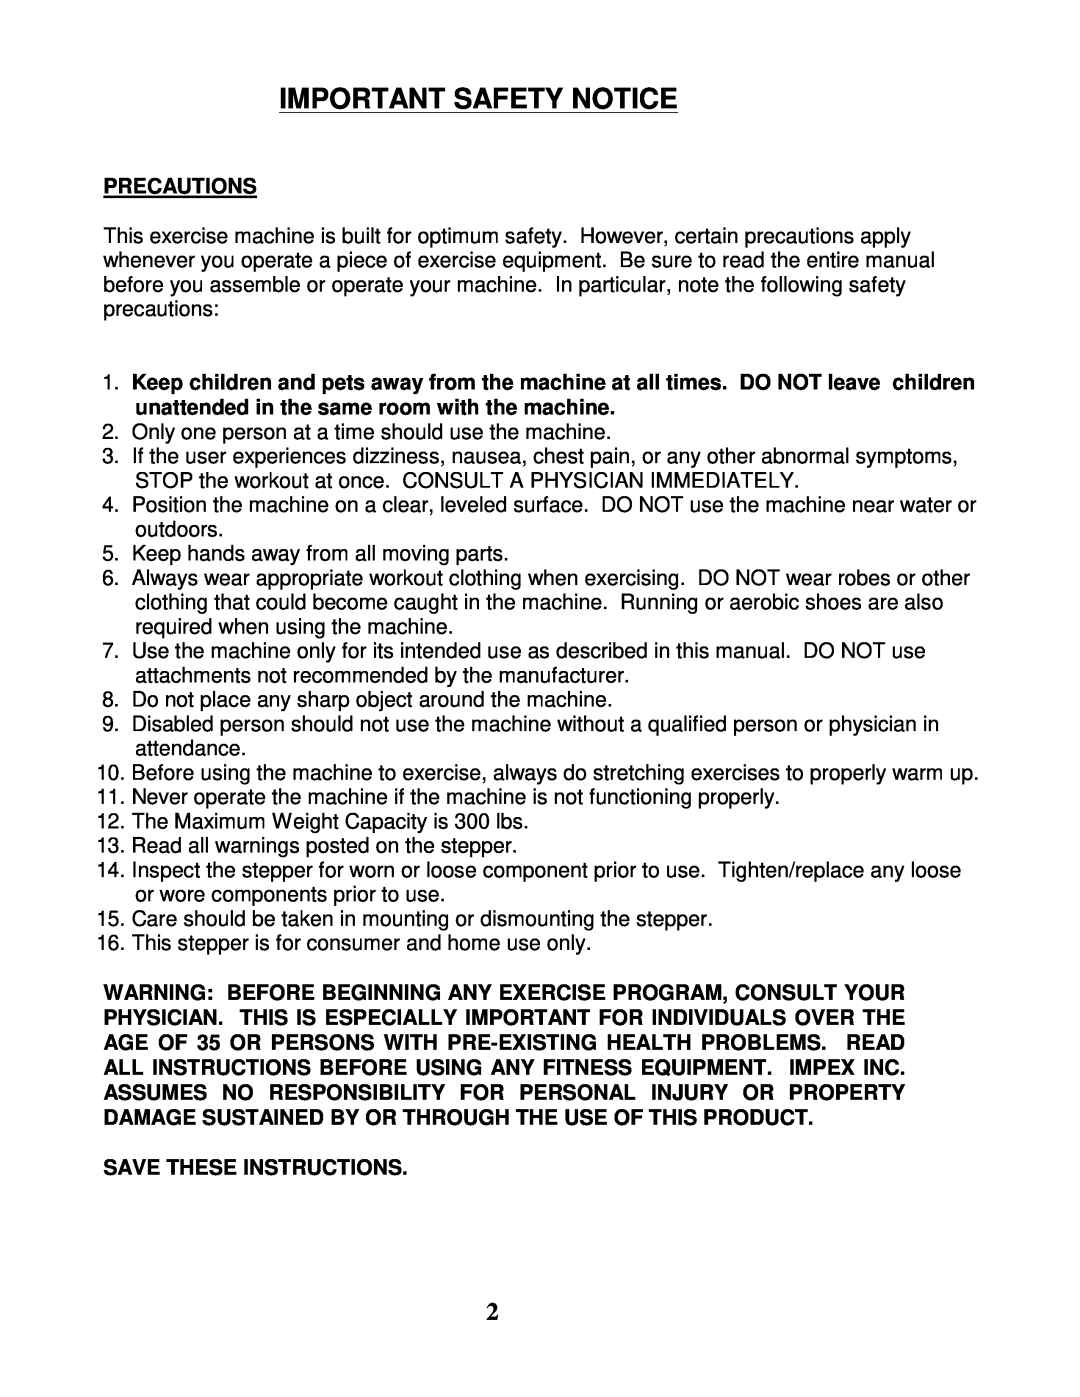 Impex MS-60 manual Important Safety Notice, Precautions, Save These Instructions 